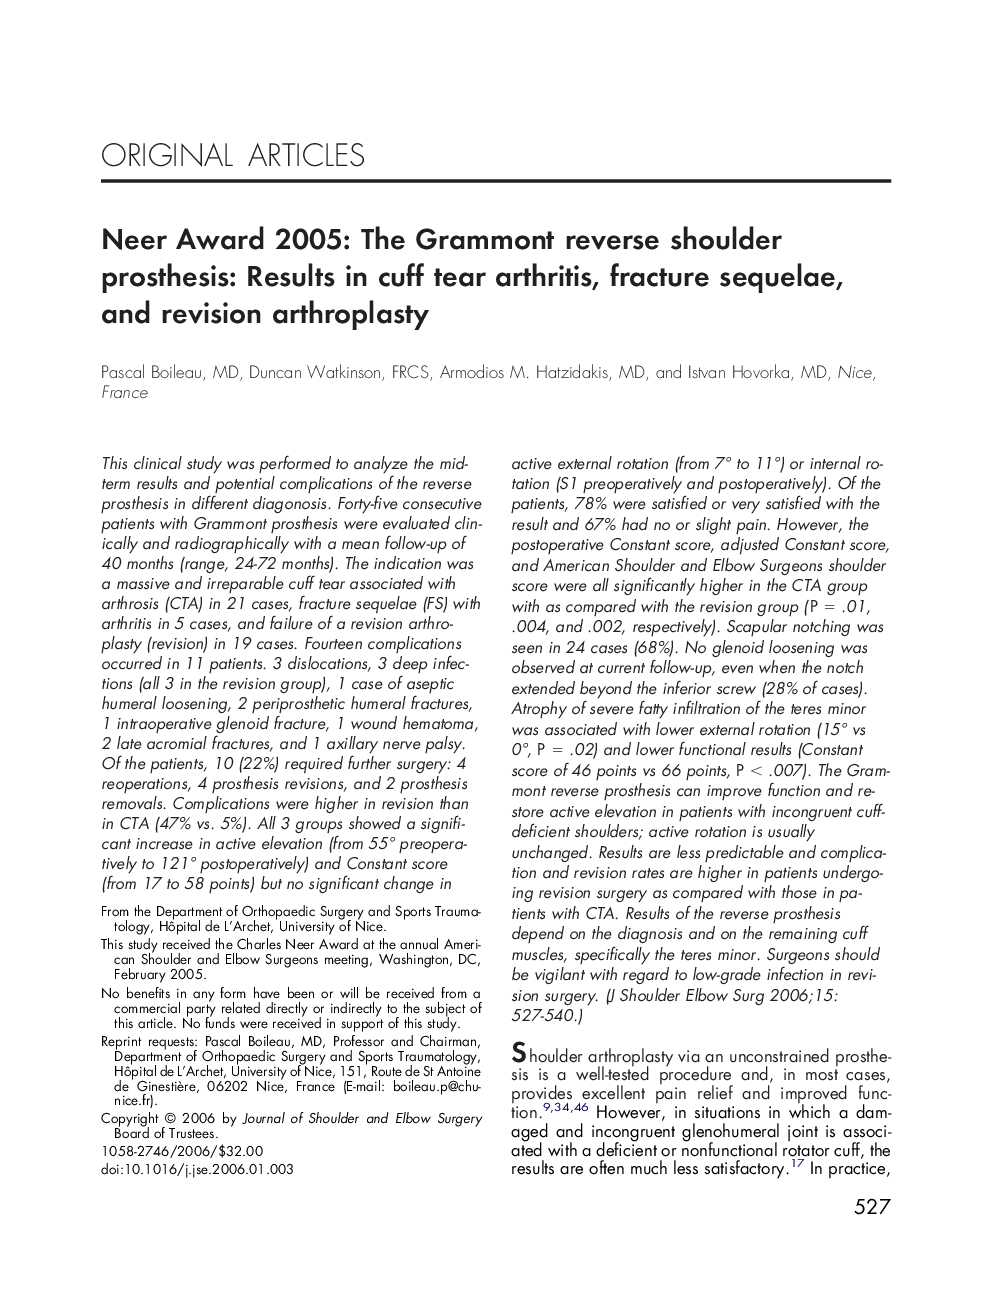 Neer Award 2005: The Grammont reverse shoulder prosthesis: Results in cuff tear arthritis, fracture sequelae, and revision arthroplasty 